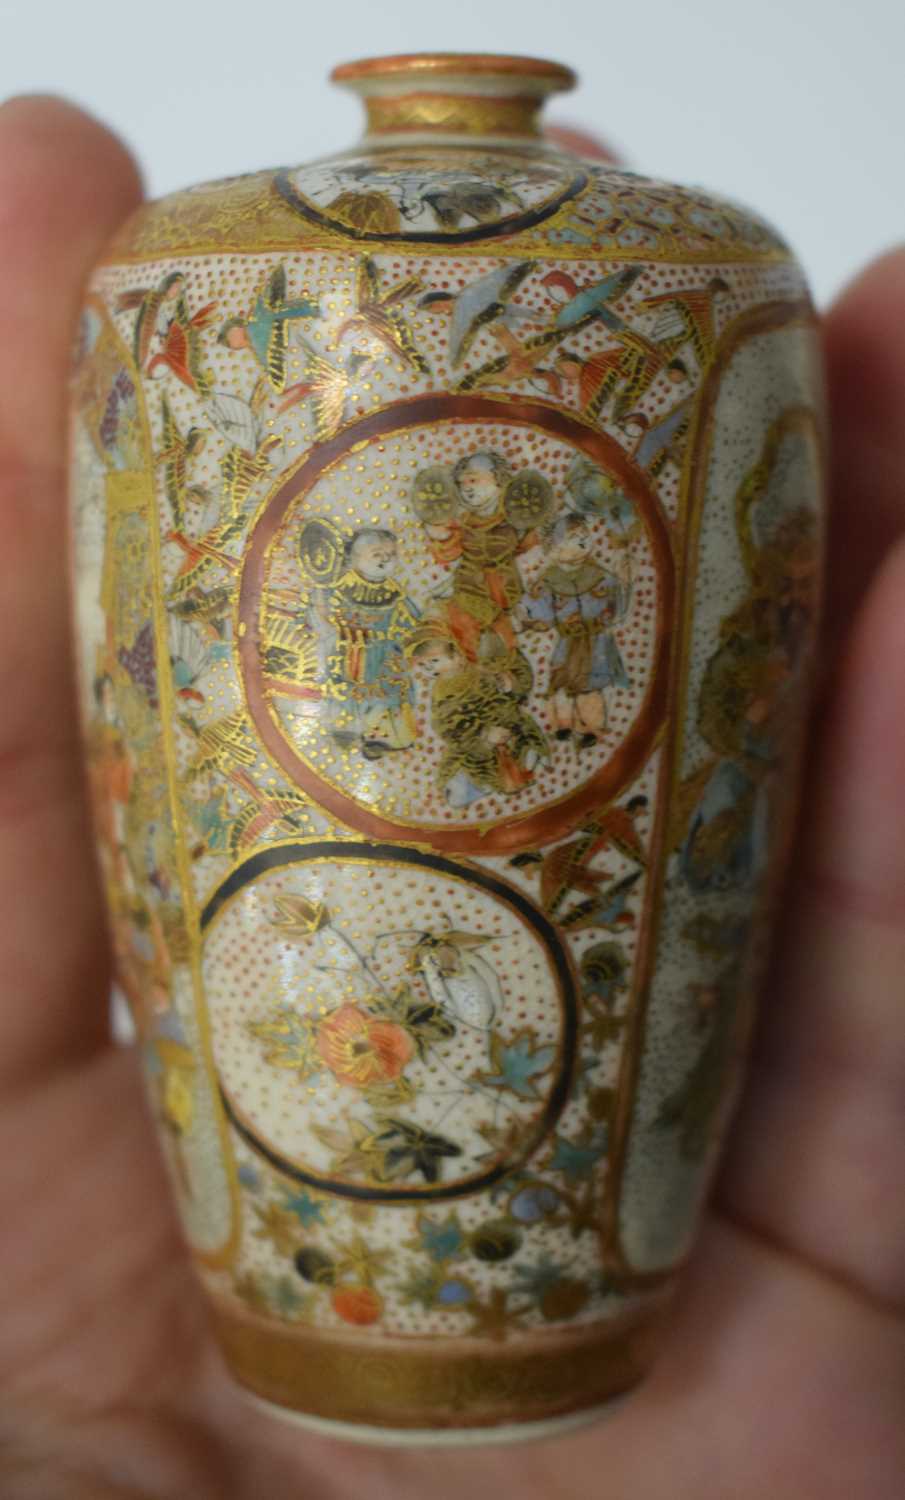 A SMALL 19TH CENTURY JAPANESE MEIJI PERIOD SATSUMA POTTERY VASE painted with figures and birds - Image 13 of 14